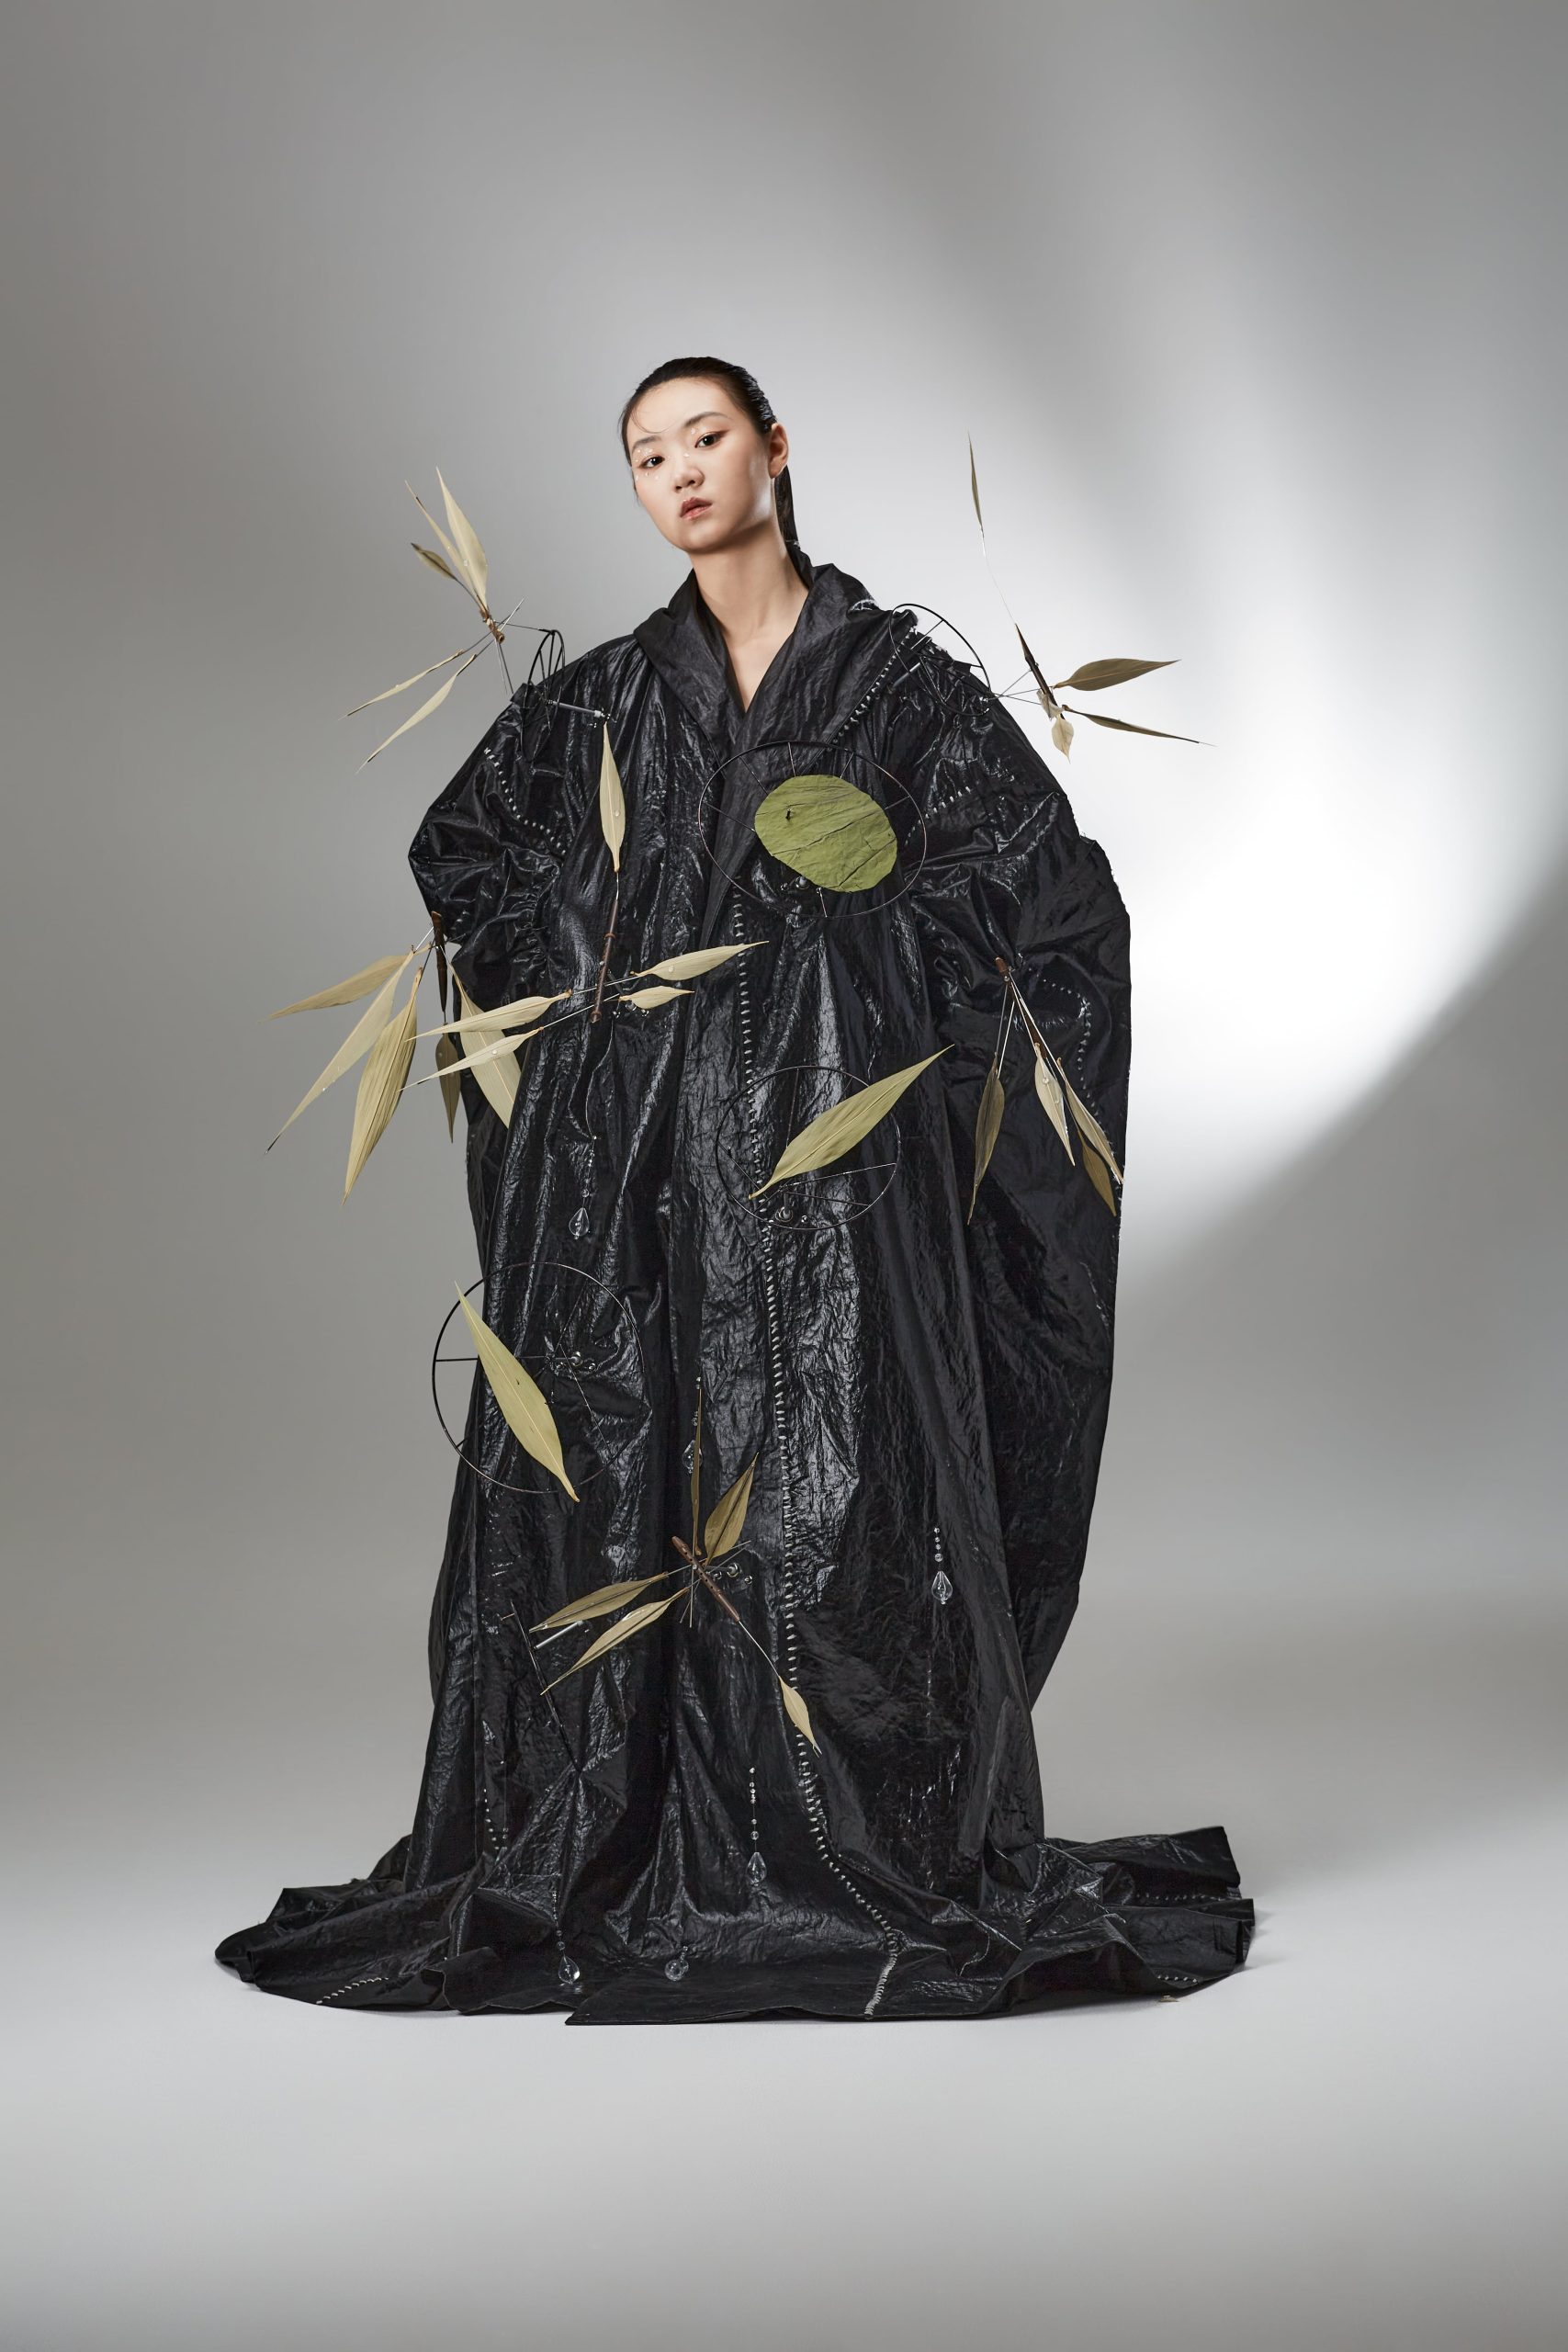 Siyun Huang Presents Her Digital Showcase At London Fashion Week With A Speculative Kinetic Fashion Collection Titled 'Immateriality'